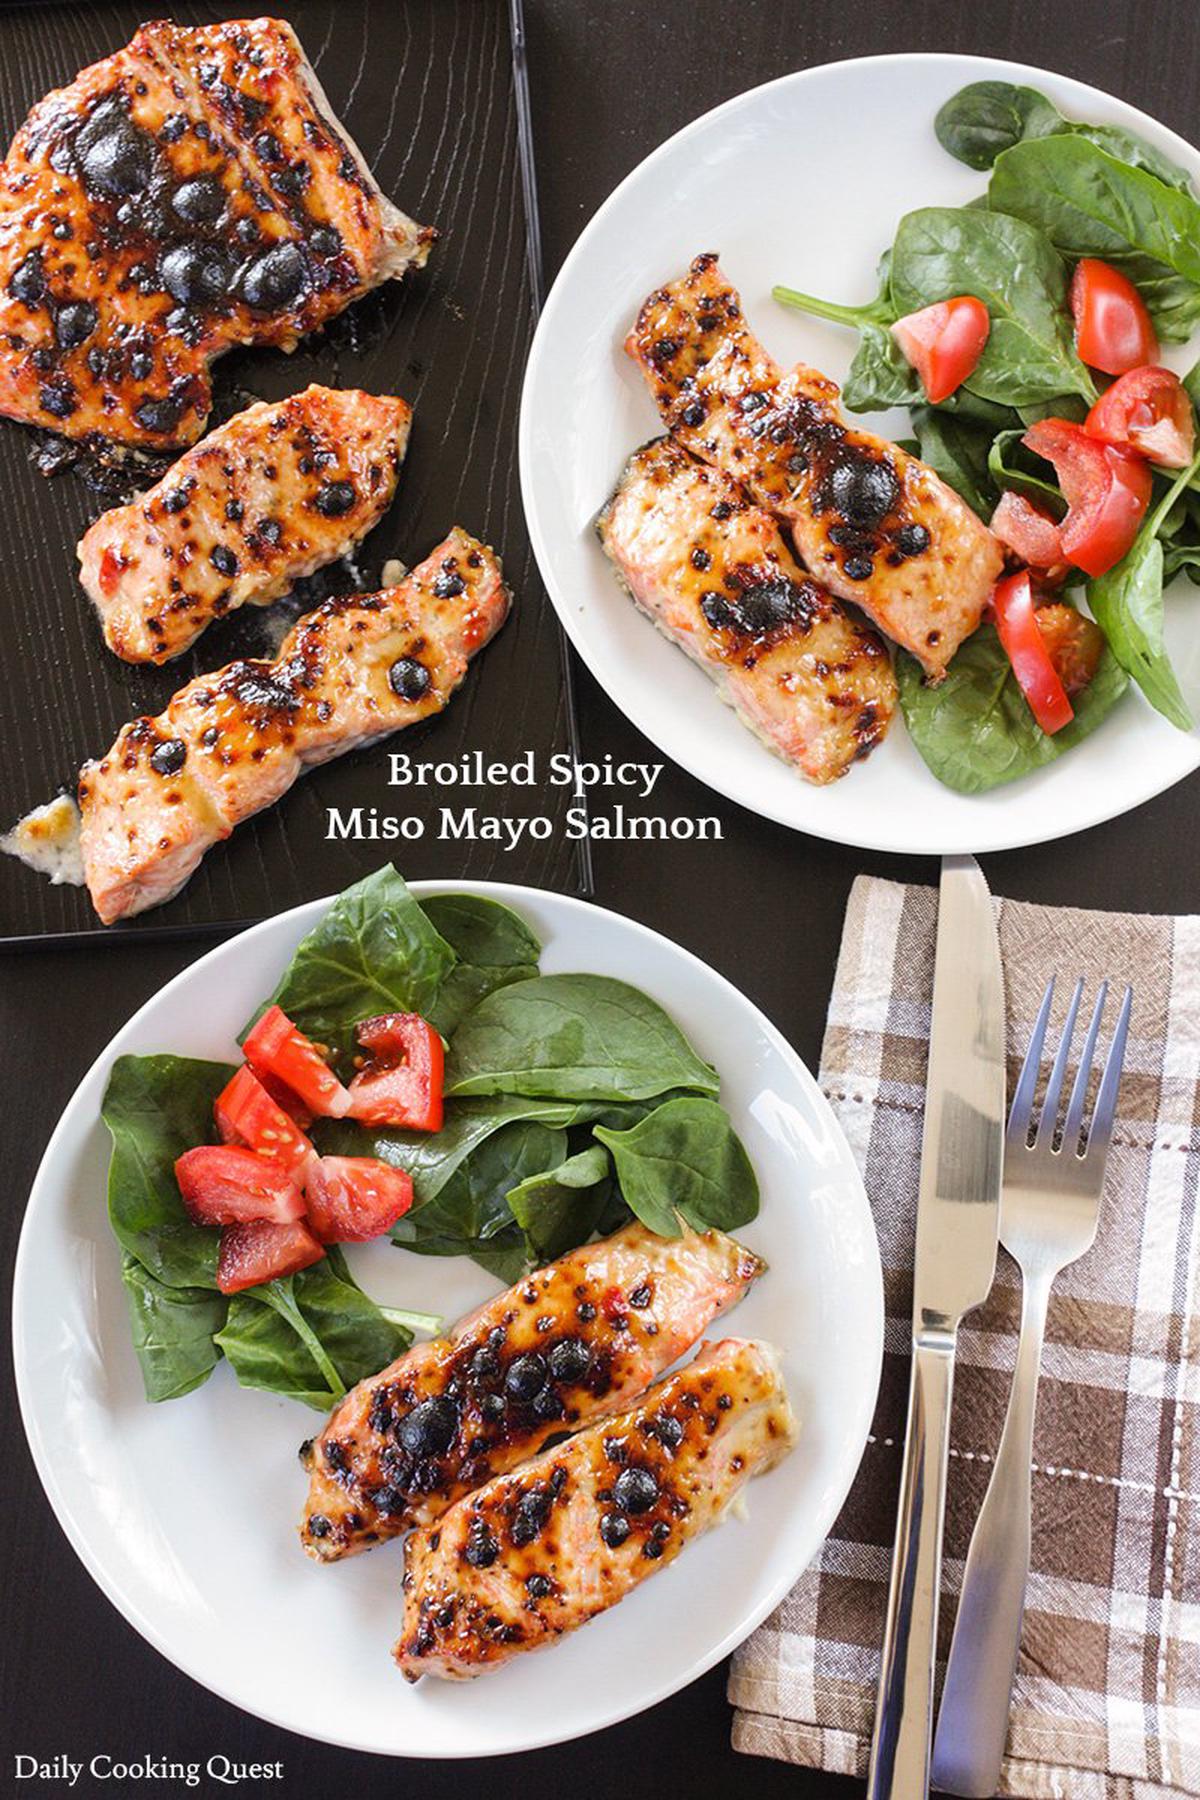 Broiled Spicy Miso Mayo Salmon